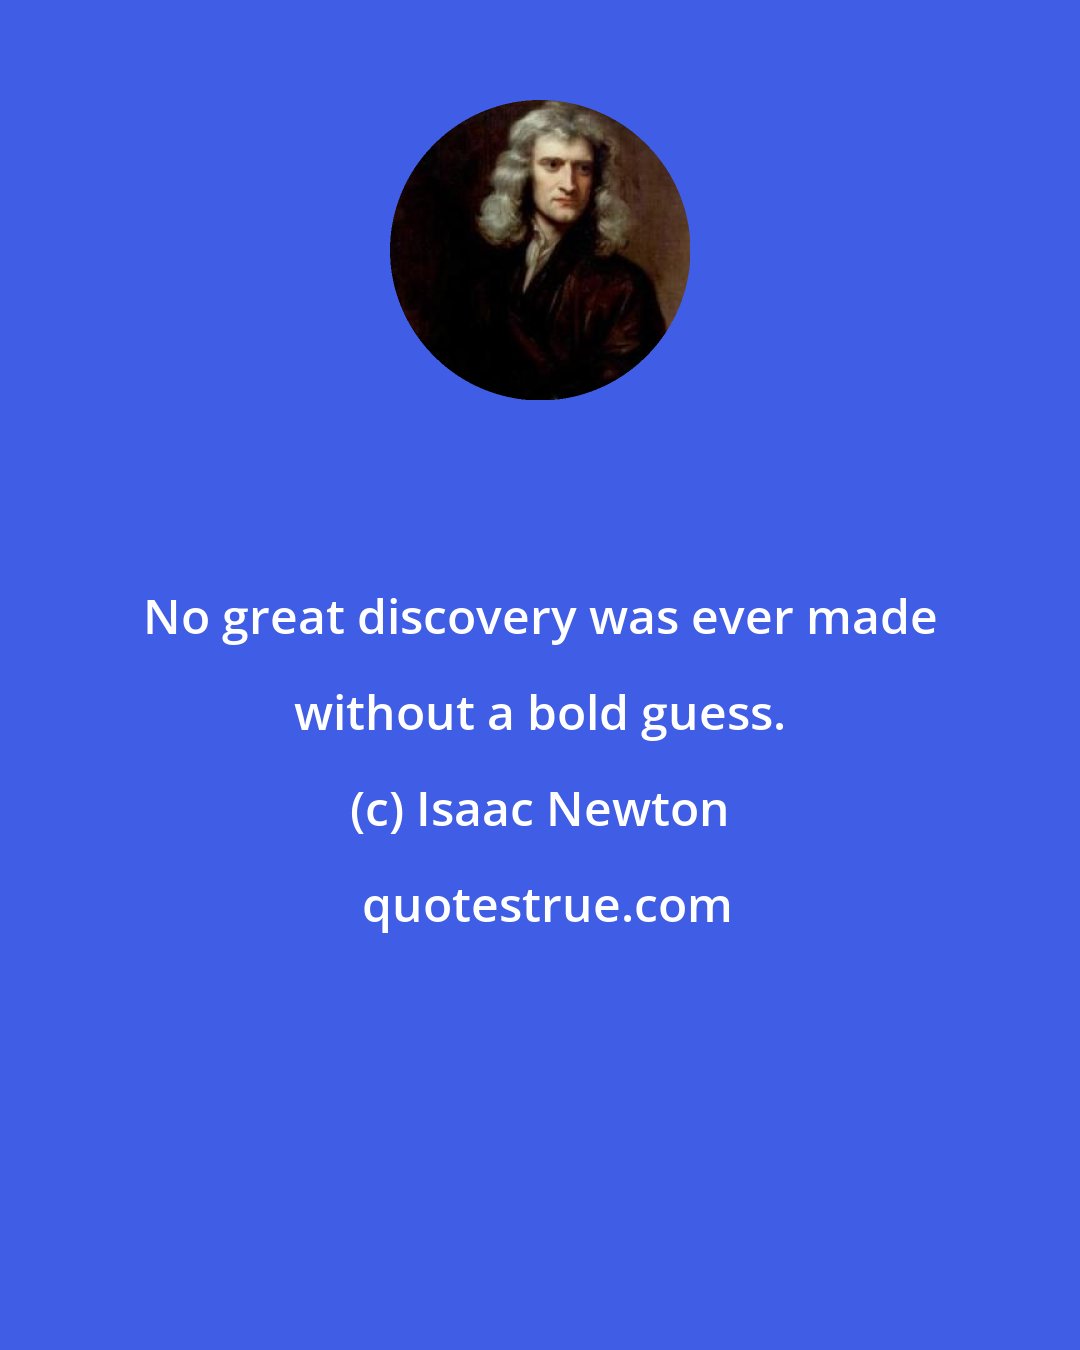 Isaac Newton: No great discovery was ever made without a bold guess.